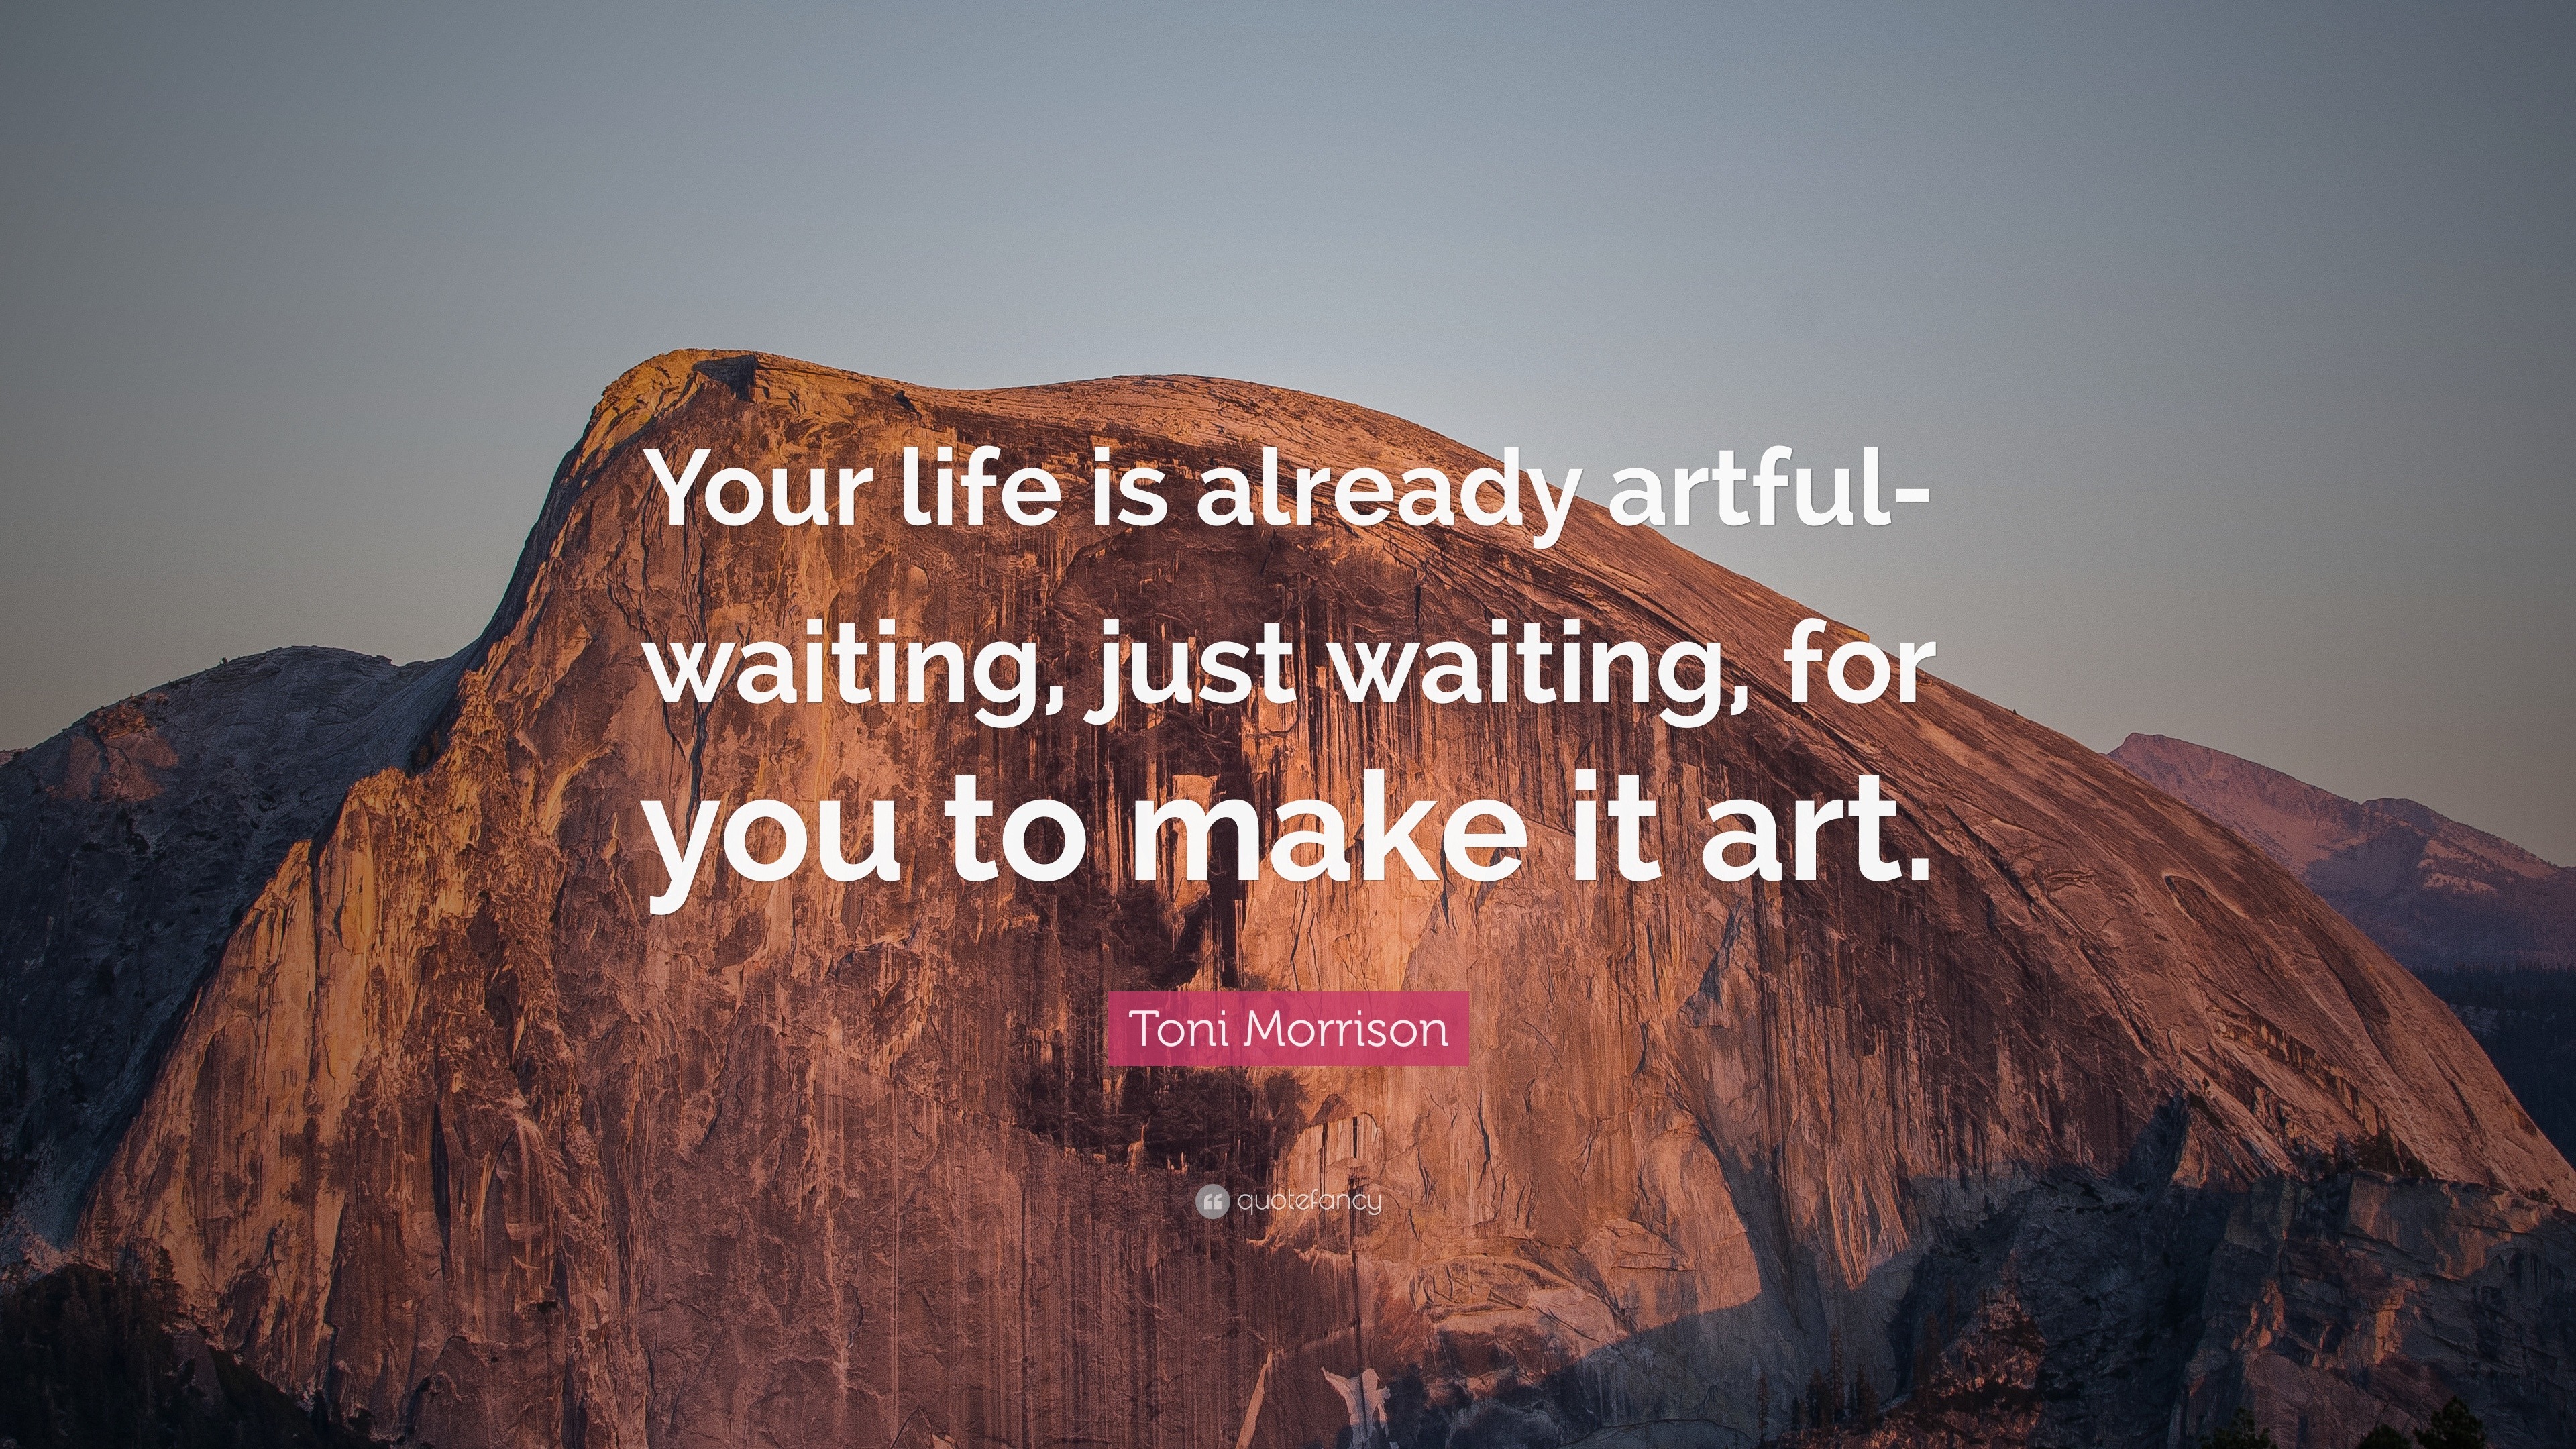 Toni Morrison Quote: “Your life is already artful-waiting, just waiting